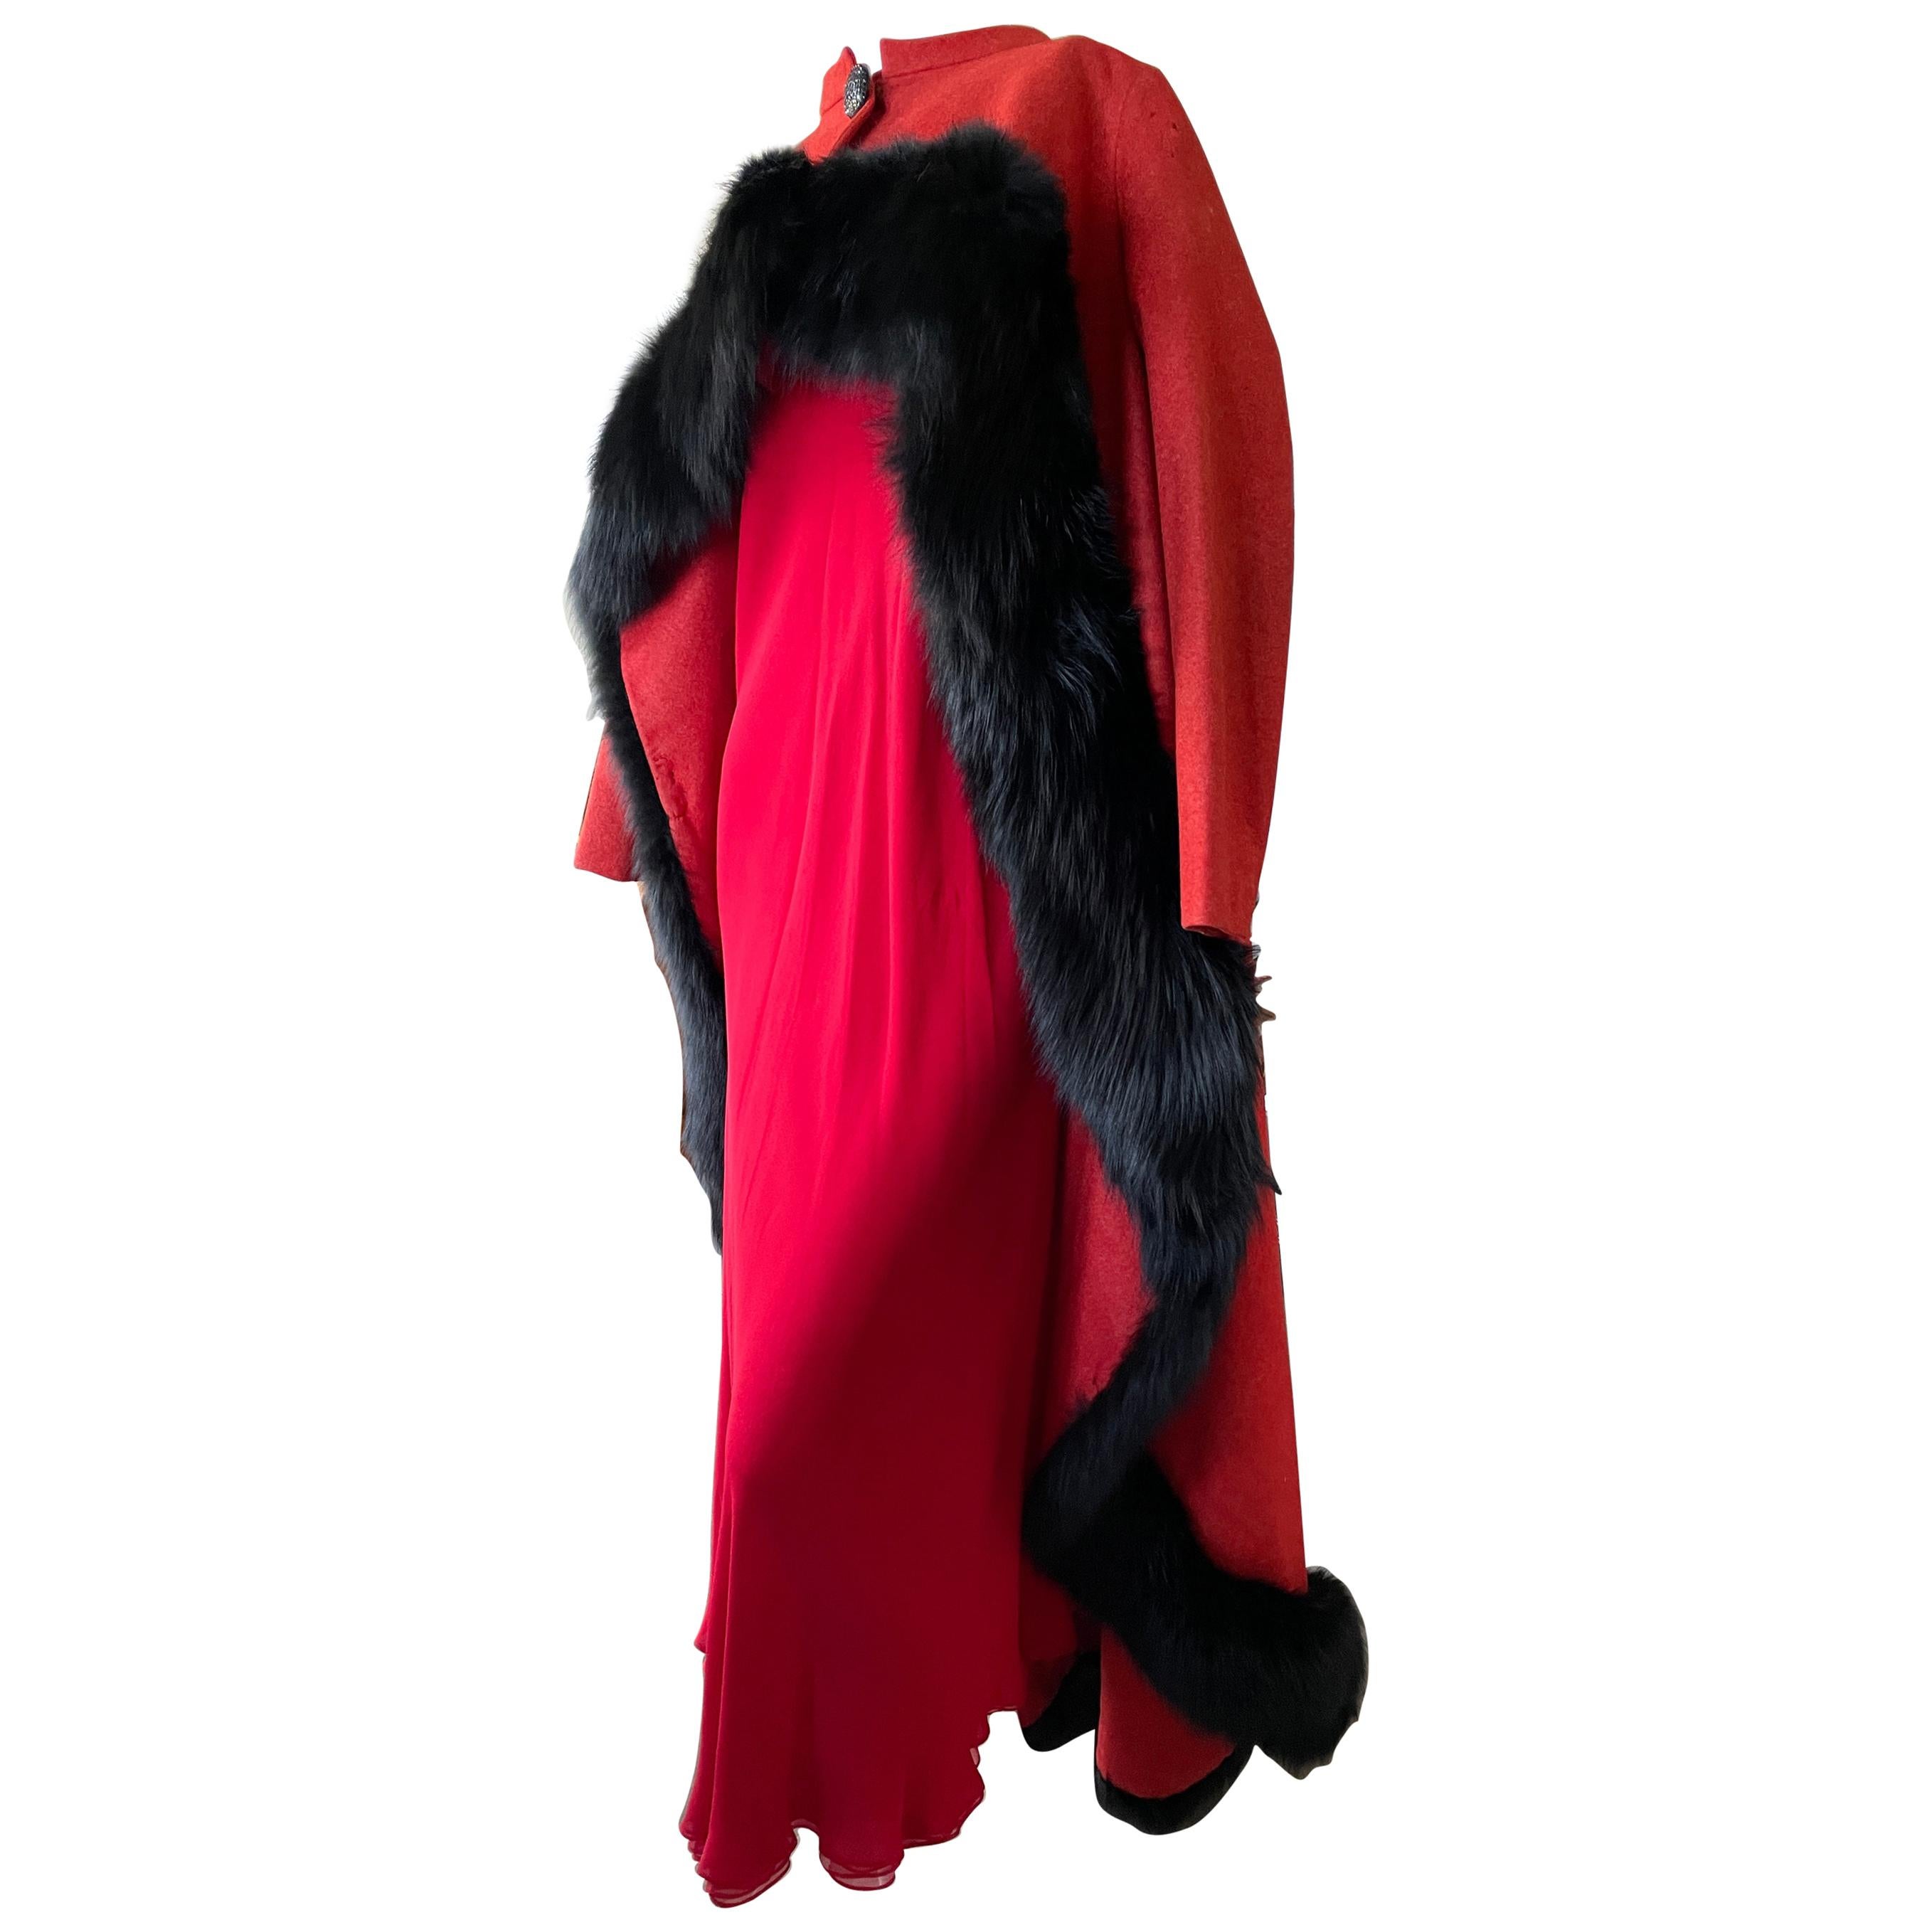 Arnold Scaasi Dramatic Red Opera Cape Trimmed in Black Fox For Sale